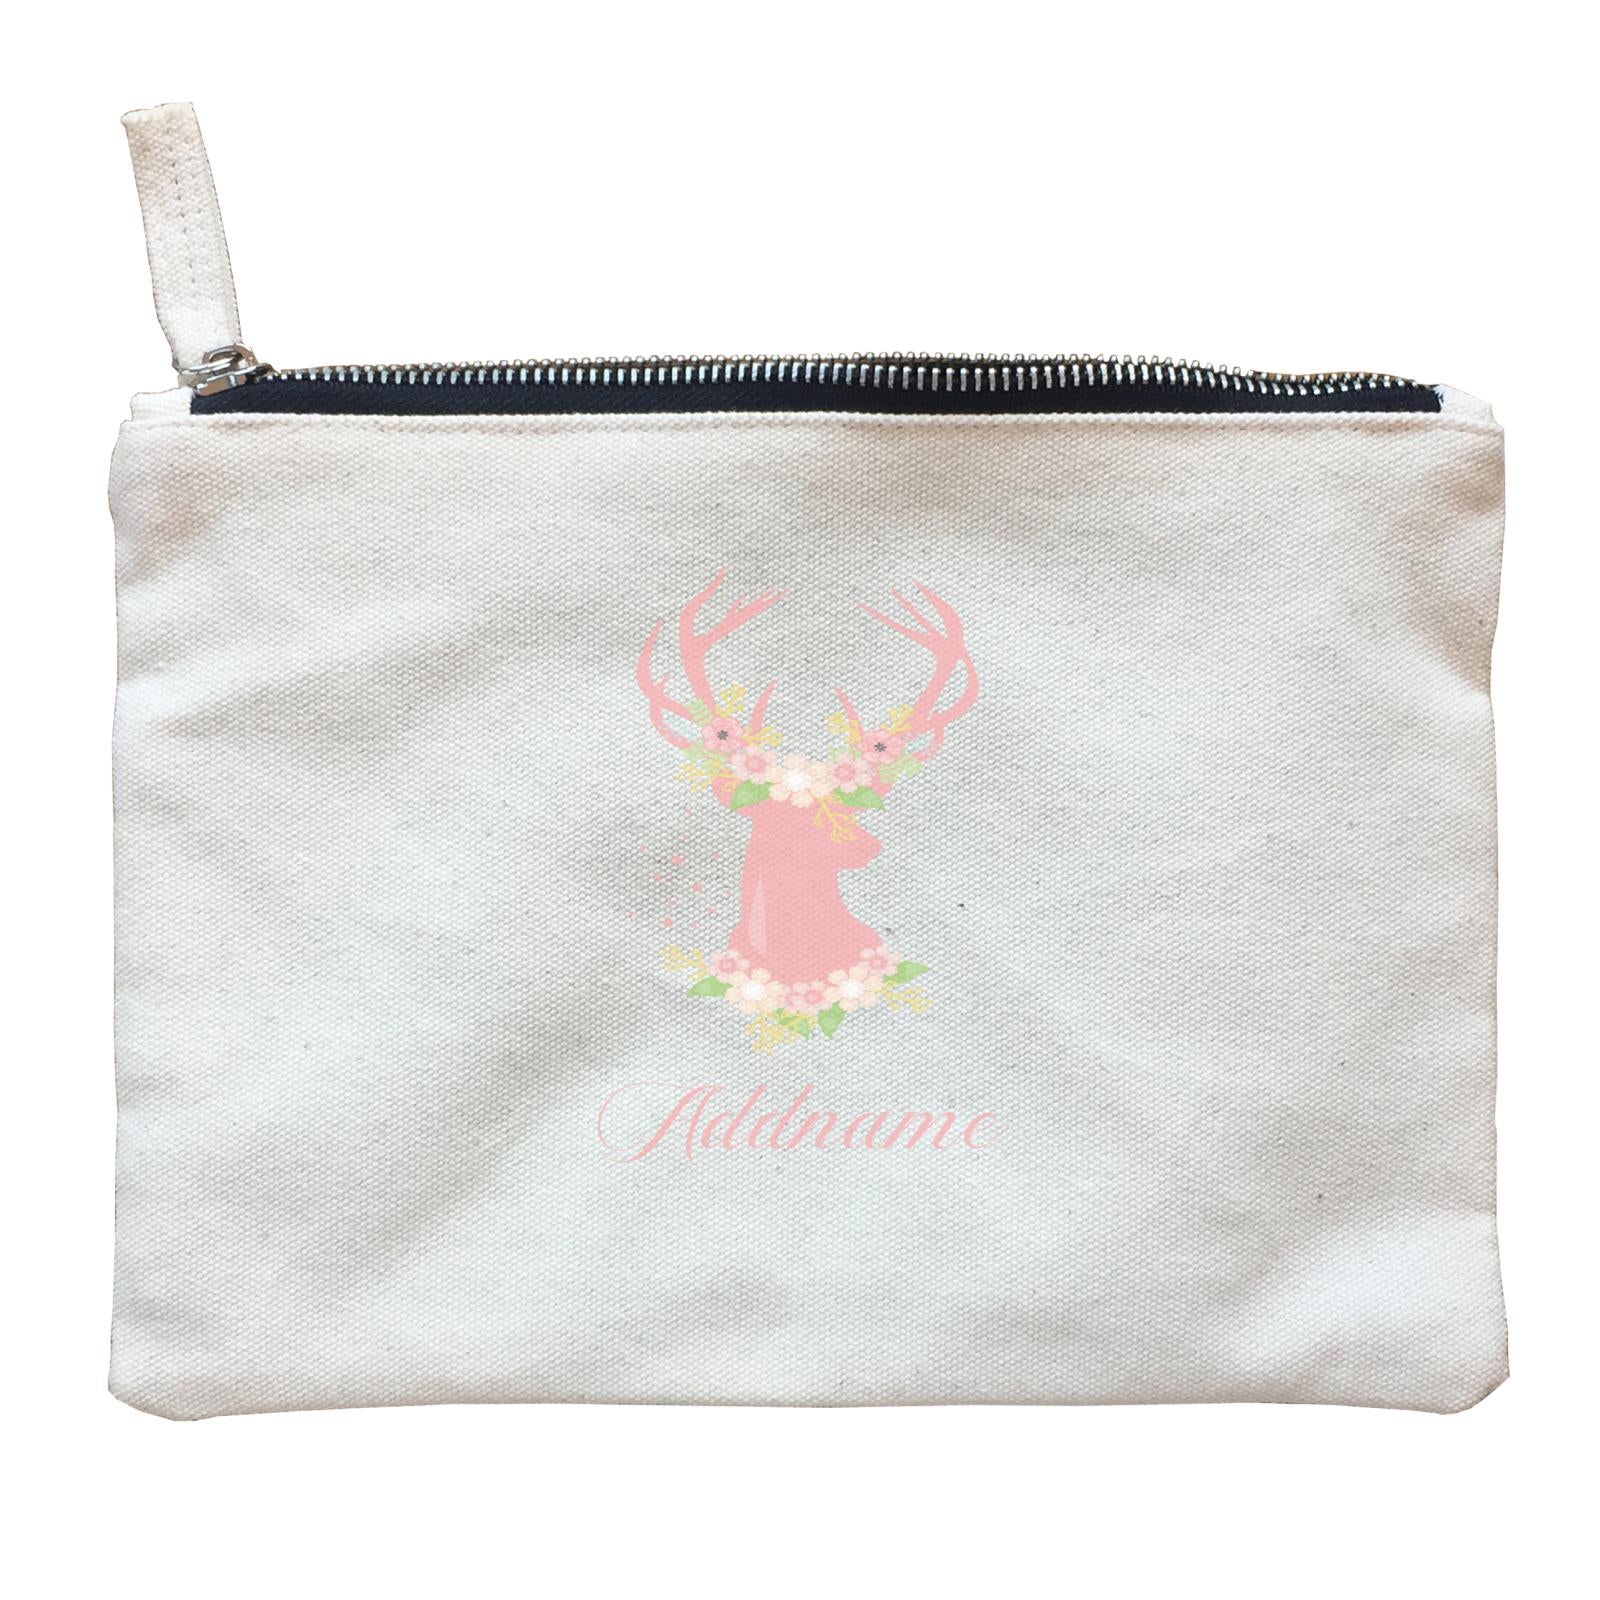 Basic Family Series Pastel Deer Pink Deer With Flower Addname Zipper Pouch